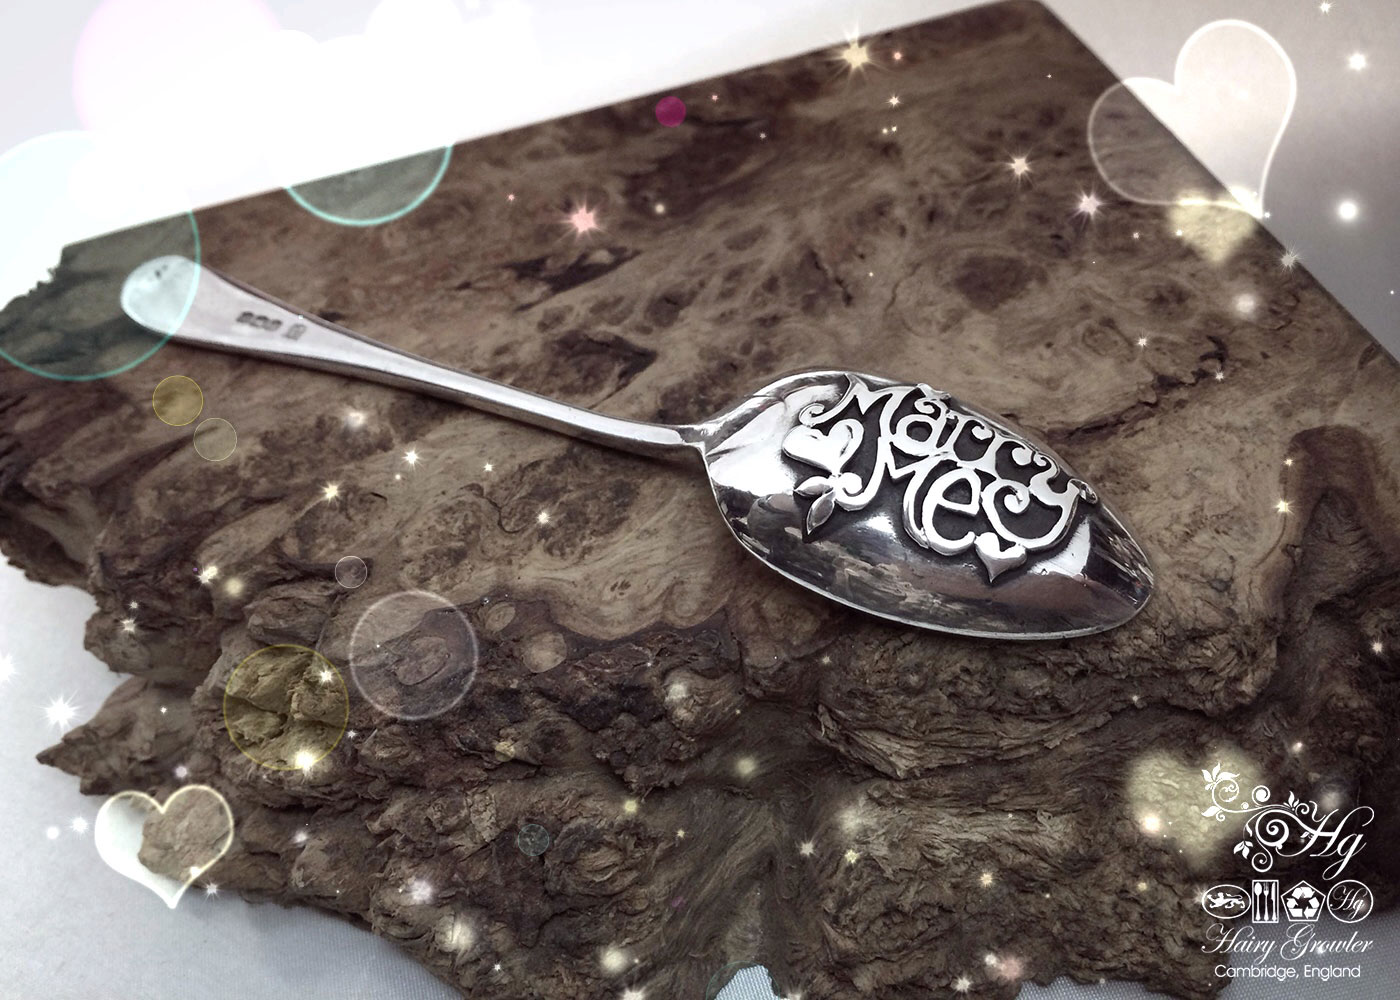 The Star Crossed Lovers collection - handmade and recycled sterling silver 'popping the question' proposal spoon